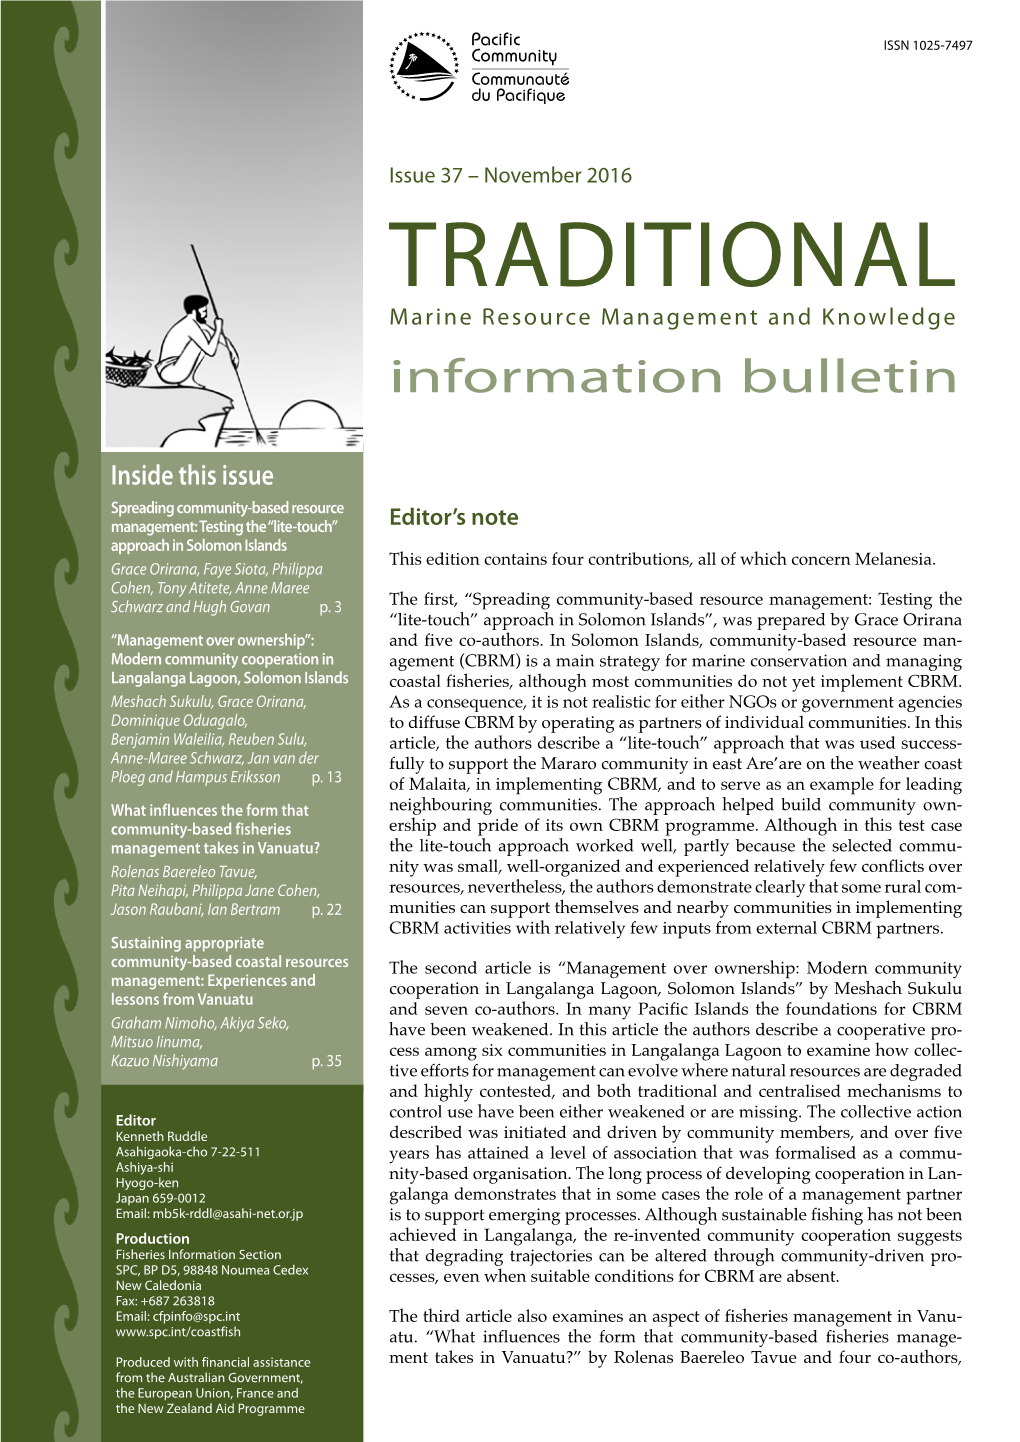 TRADITIONAL Marine Resource Management and Knowledge Information Bulletin